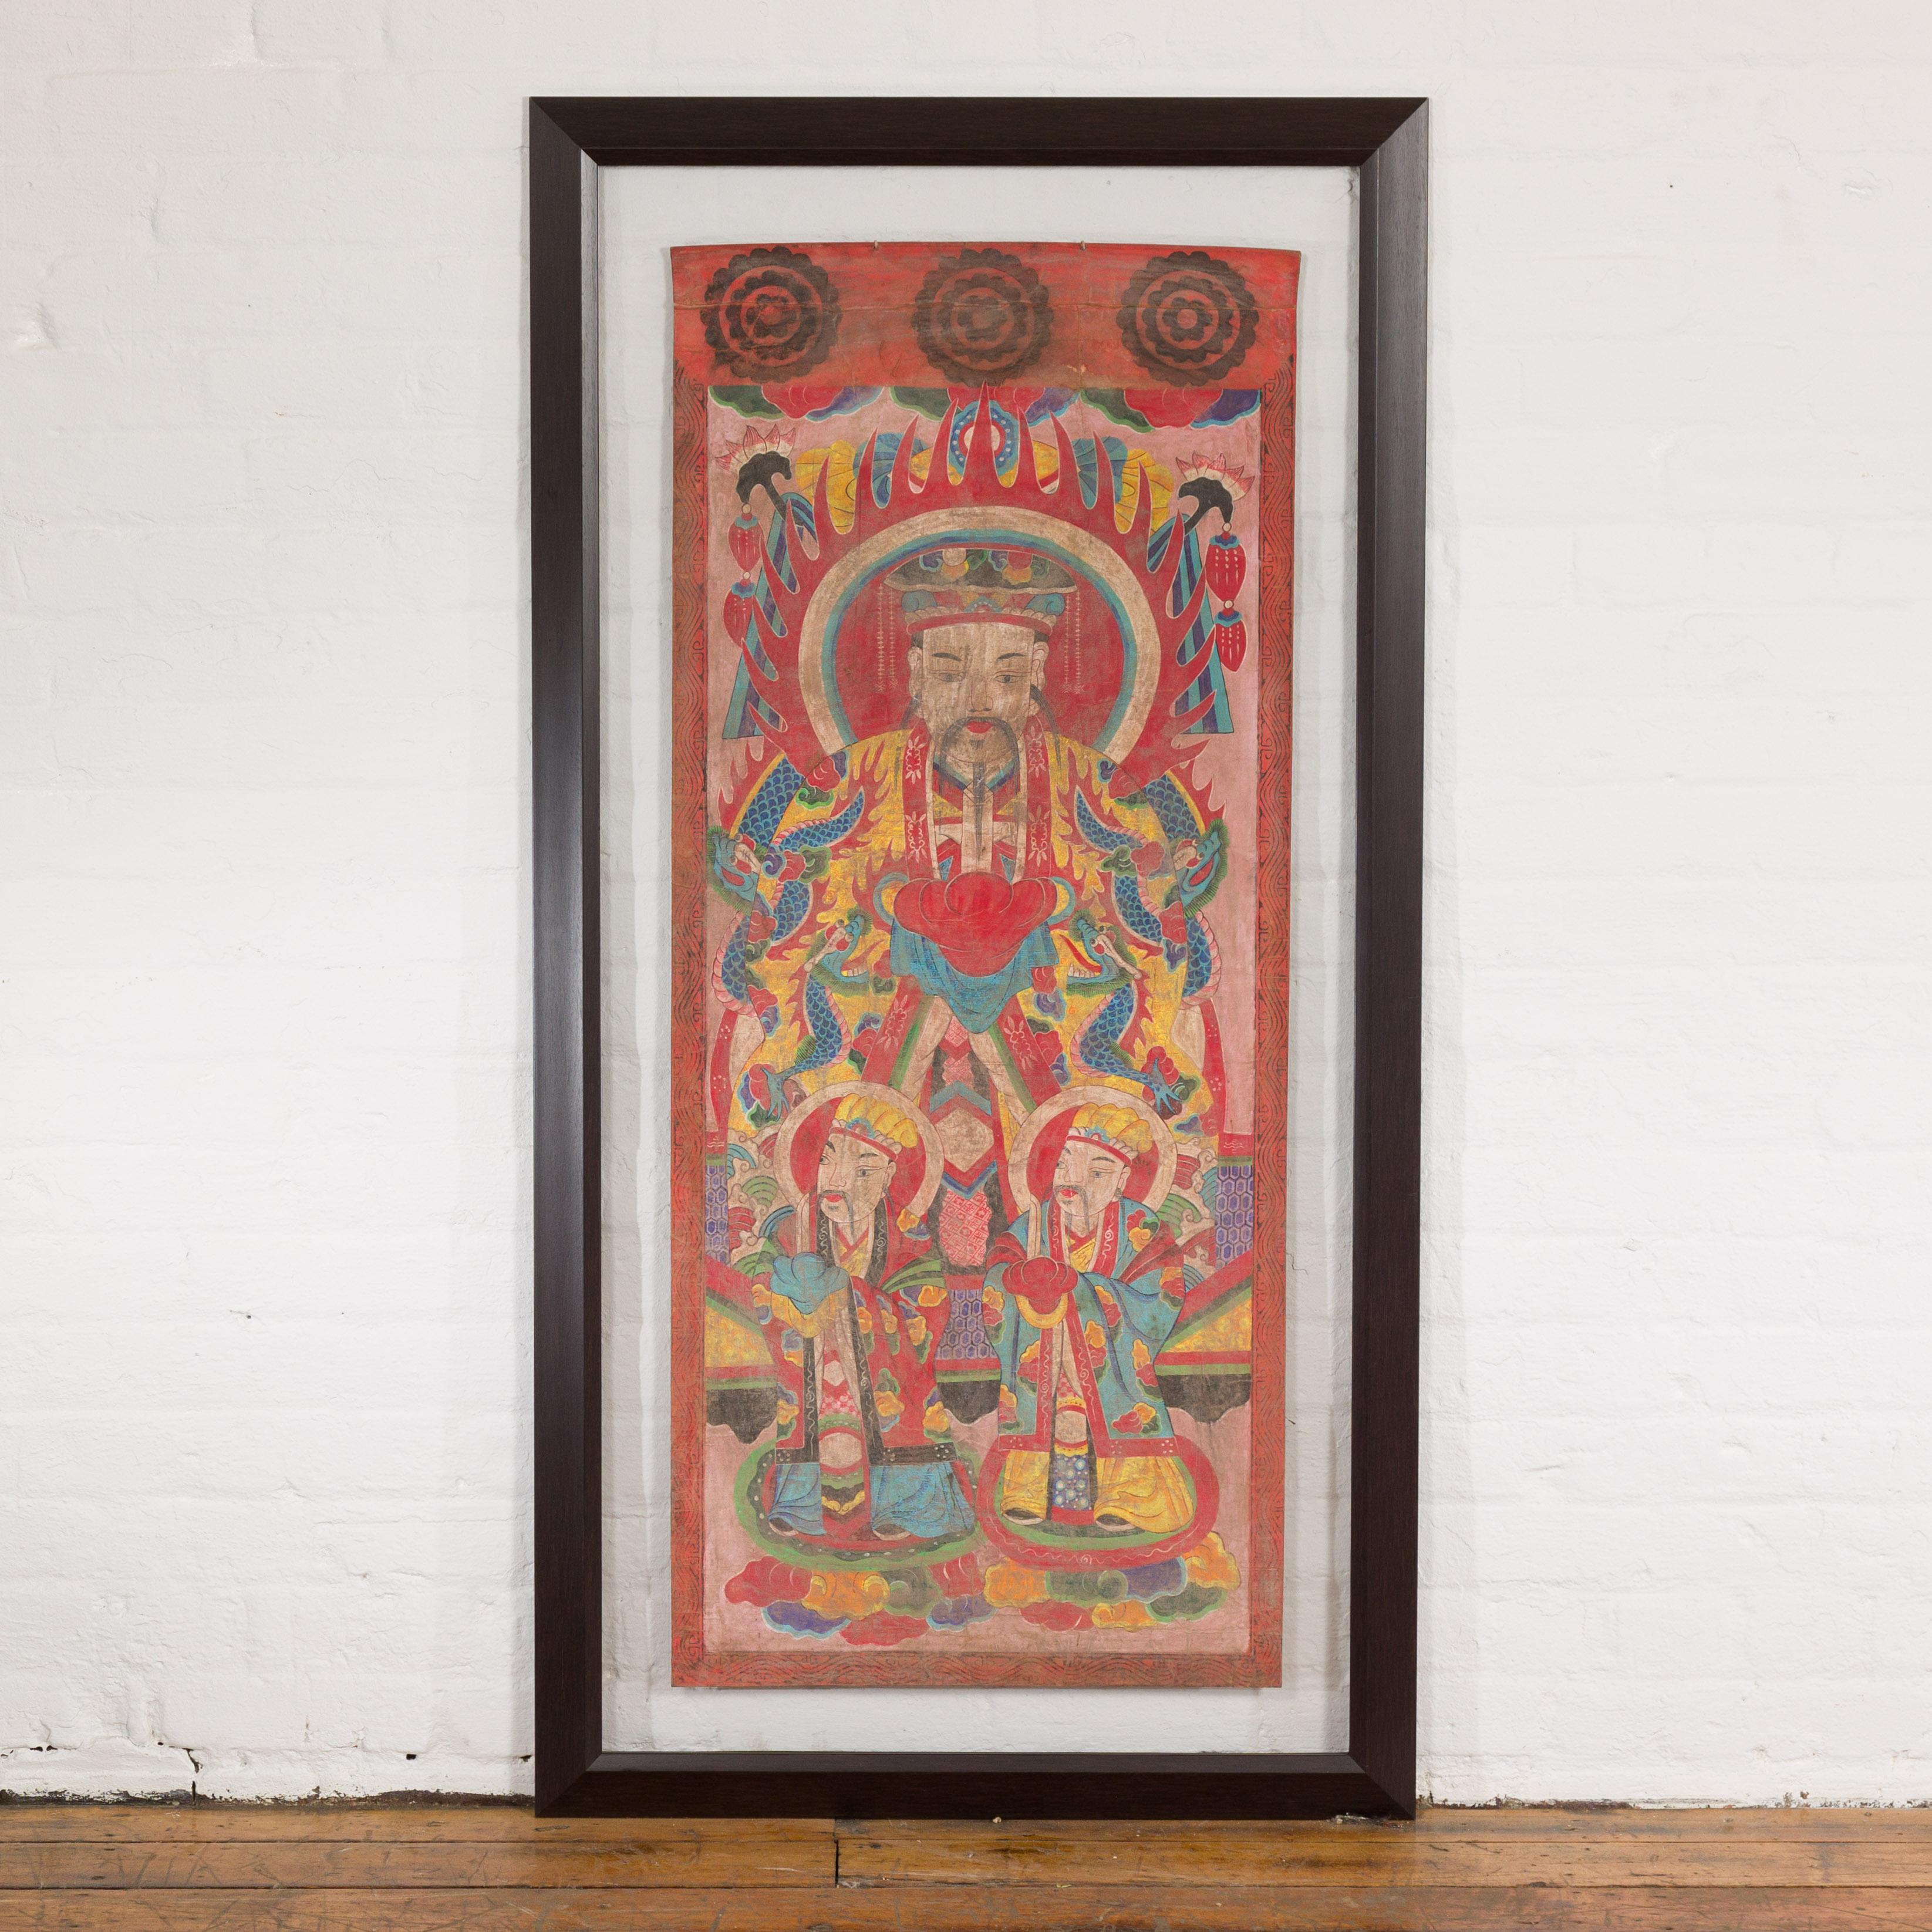 Mandarin Taoist Chinese ceremonial scroll portrait painting in custom plexiglass frame. Exuding an air of spiritual significance and artistic mastery, this Mandarin Taoist Chinese ceremonial scroll portrait painting captivates the viewer with its